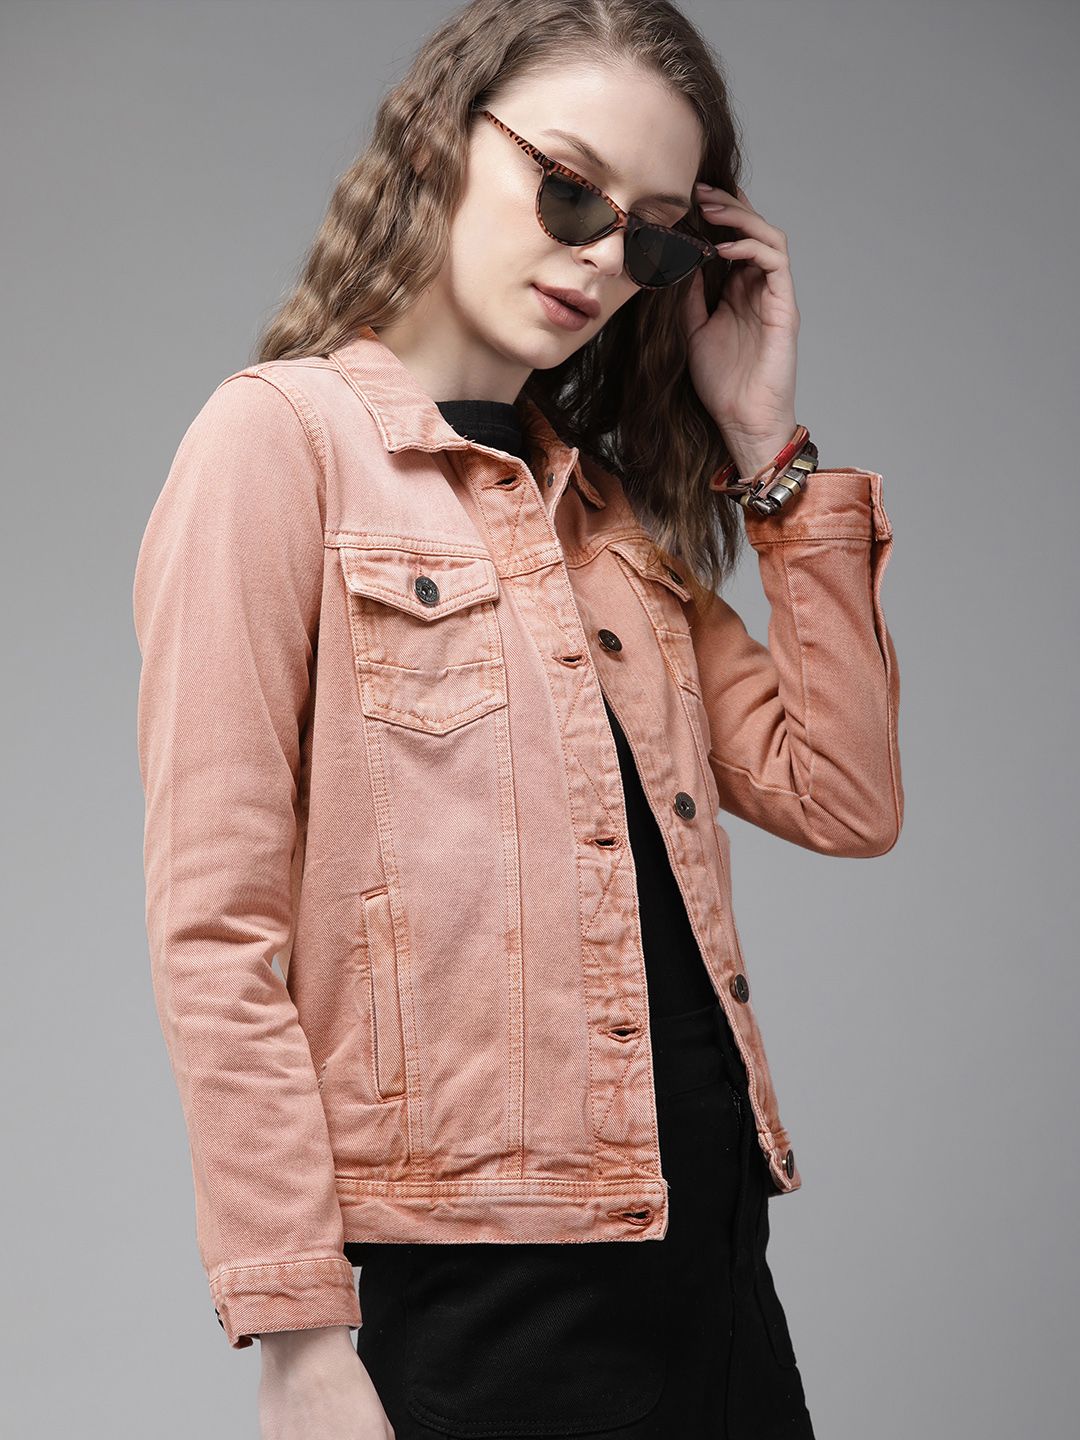 The Roadster Lifestyle Co Women Peach-Coloured Solid Trucker Denim Jacket Price in India